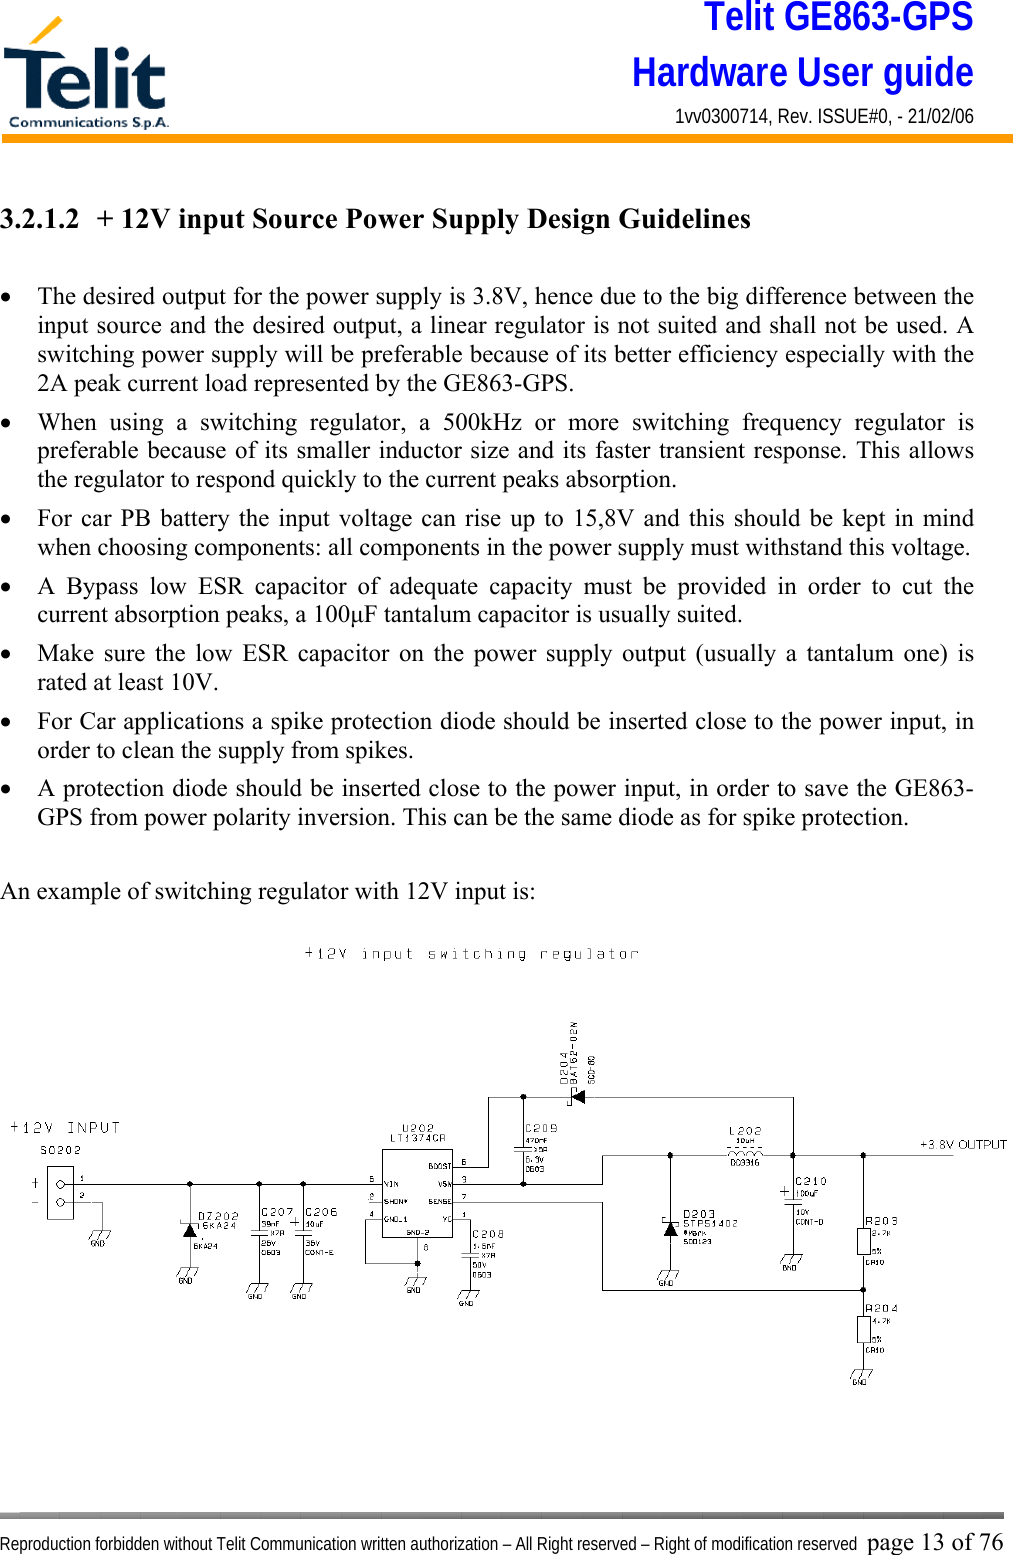 Telit GE863-GPS Hardware User guide 1vv0300714, Rev. ISSUE#0, - 21/02/06    Reproduction forbidden without Telit Communication written authorization – All Right reserved – Right of modification reserved page 13 of 76 3.2.1.2  + 12V input Source Power Supply Design Guidelines  •  The desired output for the power supply is 3.8V, hence due to the big difference between the input source and the desired output, a linear regulator is not suited and shall not be used. A switching power supply will be preferable because of its better efficiency especially with the 2A peak current load represented by the GE863-GPS. •  When using a switching regulator, a 500kHz or more switching frequency regulator is preferable because of its smaller inductor size and its faster transient response. This allows the regulator to respond quickly to the current peaks absorption.  •  For car PB battery the input voltage can rise up to 15,8V and this should be kept in mind when choosing components: all components in the power supply must withstand this voltage. •  A Bypass low ESR capacitor of adequate capacity must be provided in order to cut the current absorption peaks, a 100μF tantalum capacitor is usually suited. •  Make sure the low ESR capacitor on the power supply output (usually a tantalum one) is rated at least 10V. •  For Car applications a spike protection diode should be inserted close to the power input, in order to clean the supply from spikes.  •  A protection diode should be inserted close to the power input, in order to save the GE863-GPS from power polarity inversion. This can be the same diode as for spike protection.  An example of switching regulator with 12V input is:  